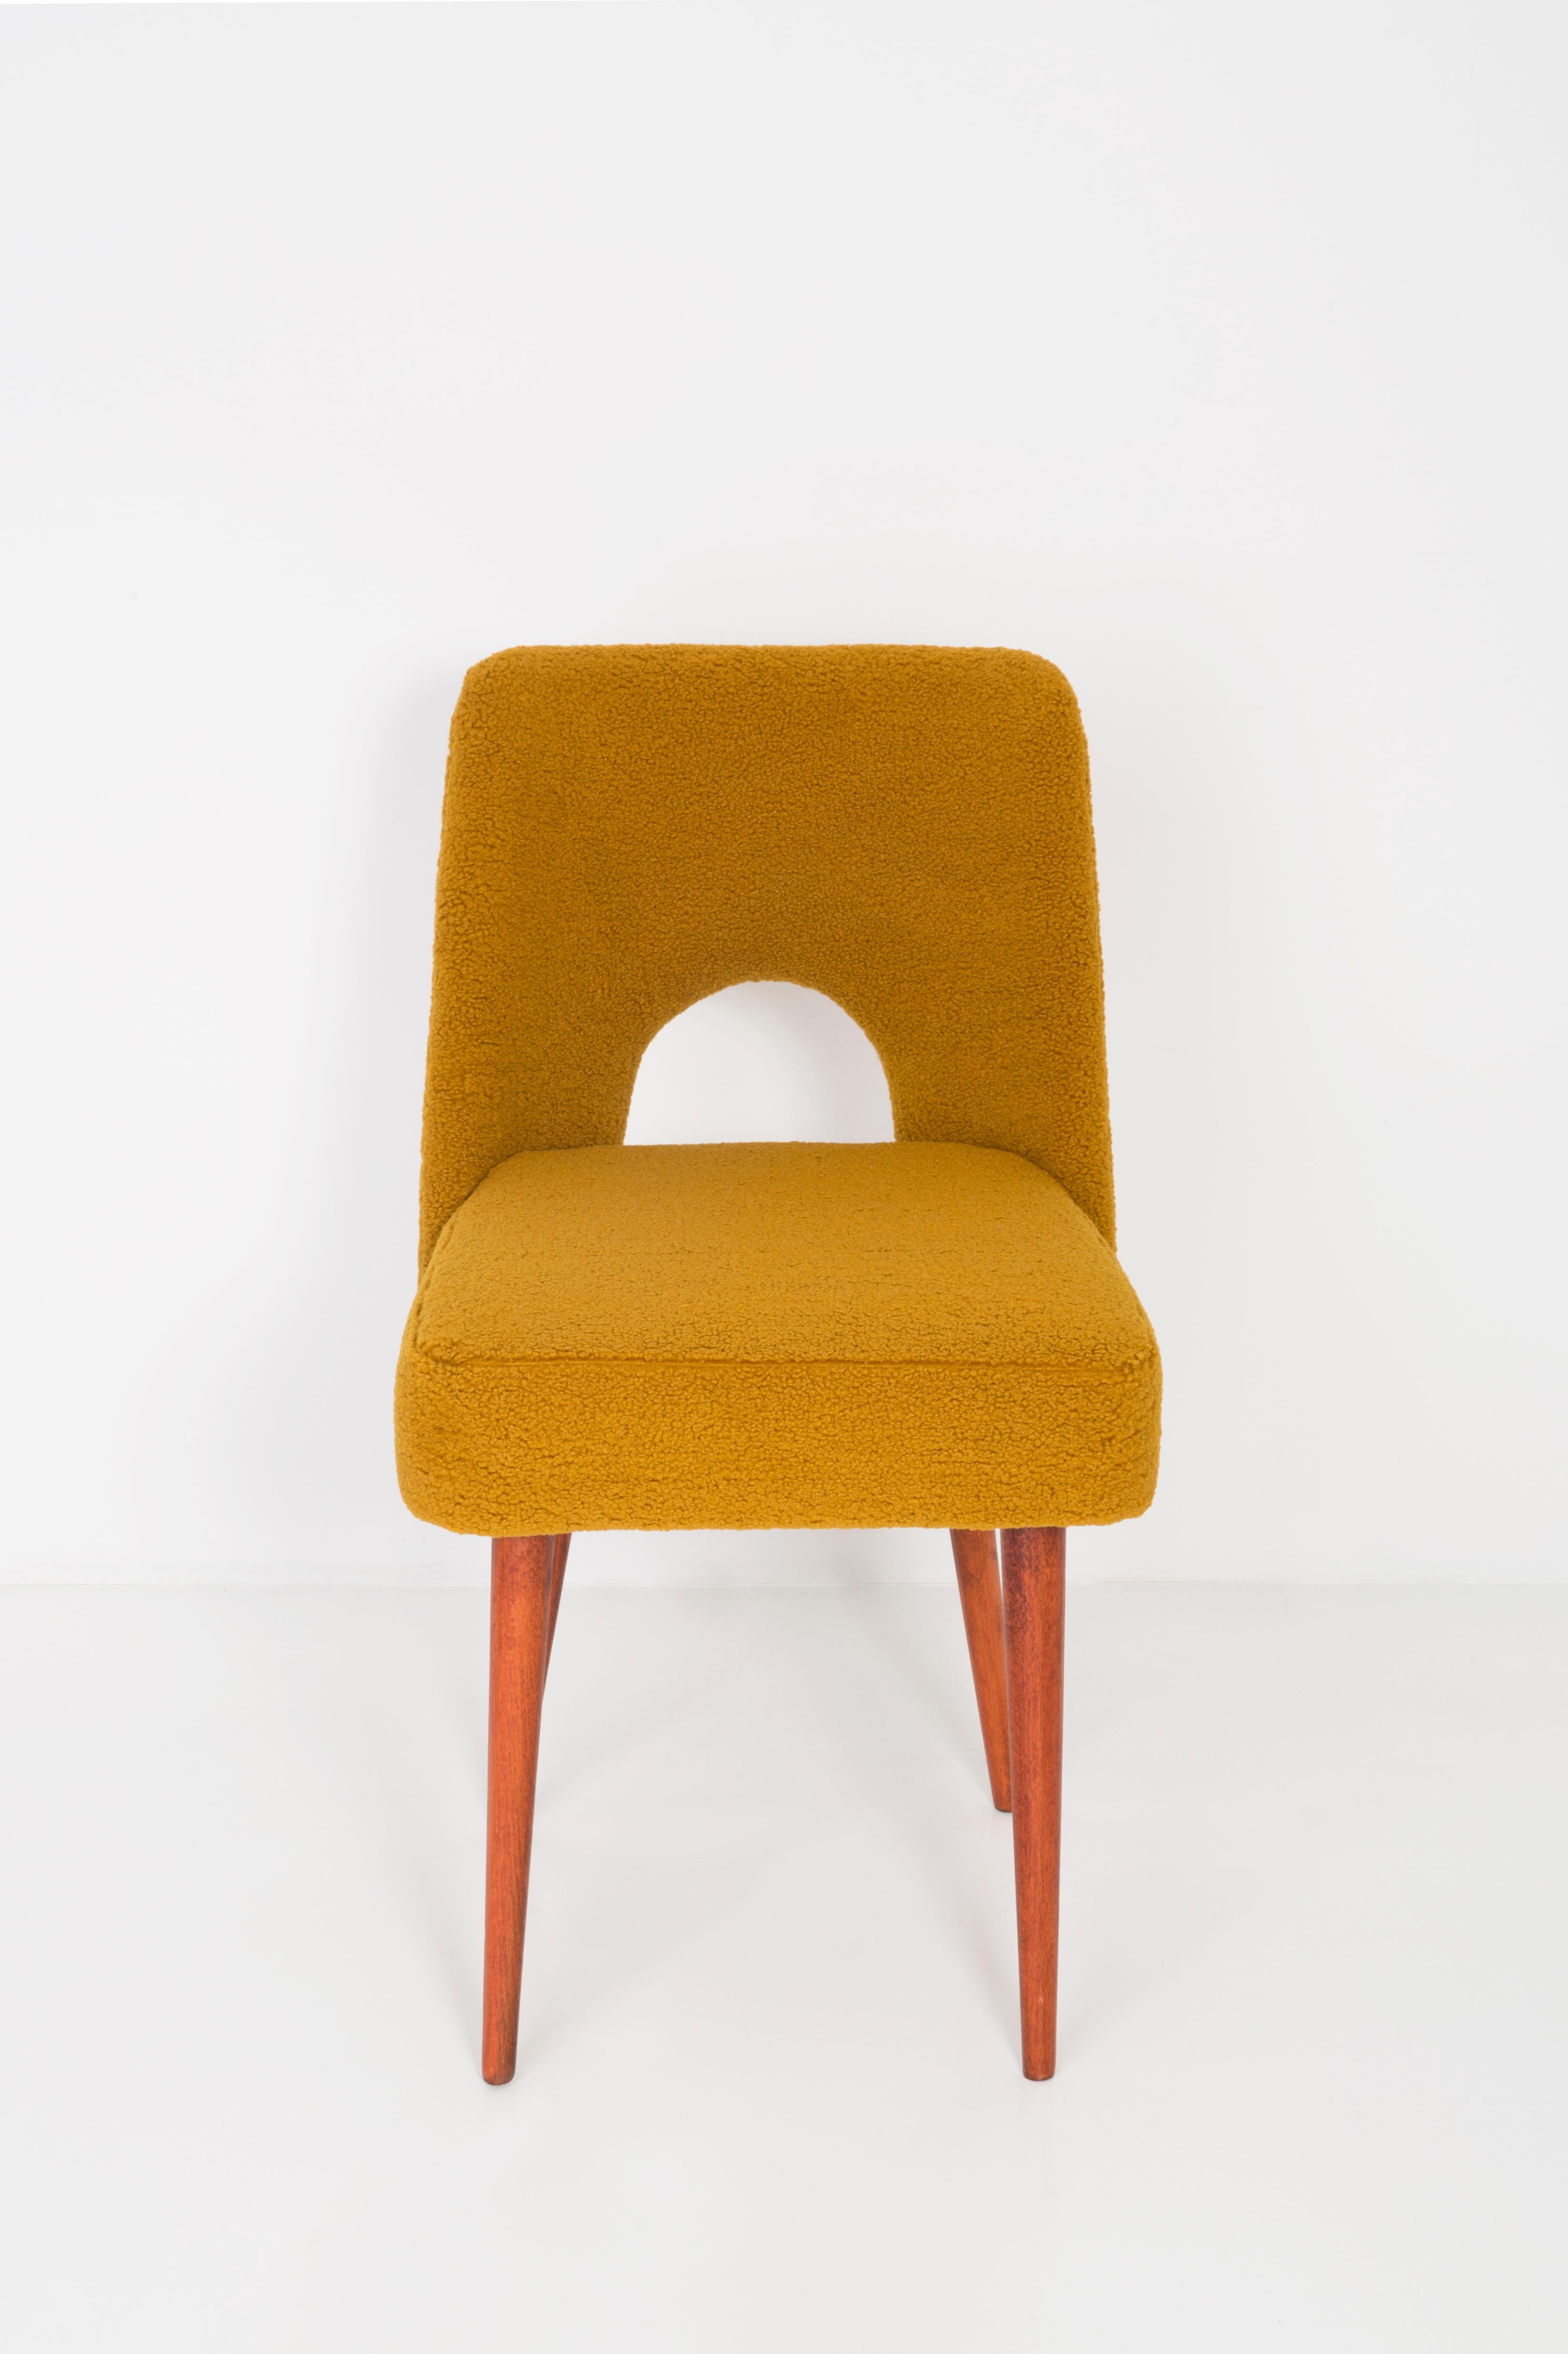 Textile Set of Twelve Yellow Ochre Boucle 'Shell' Chairs, 1960s For Sale